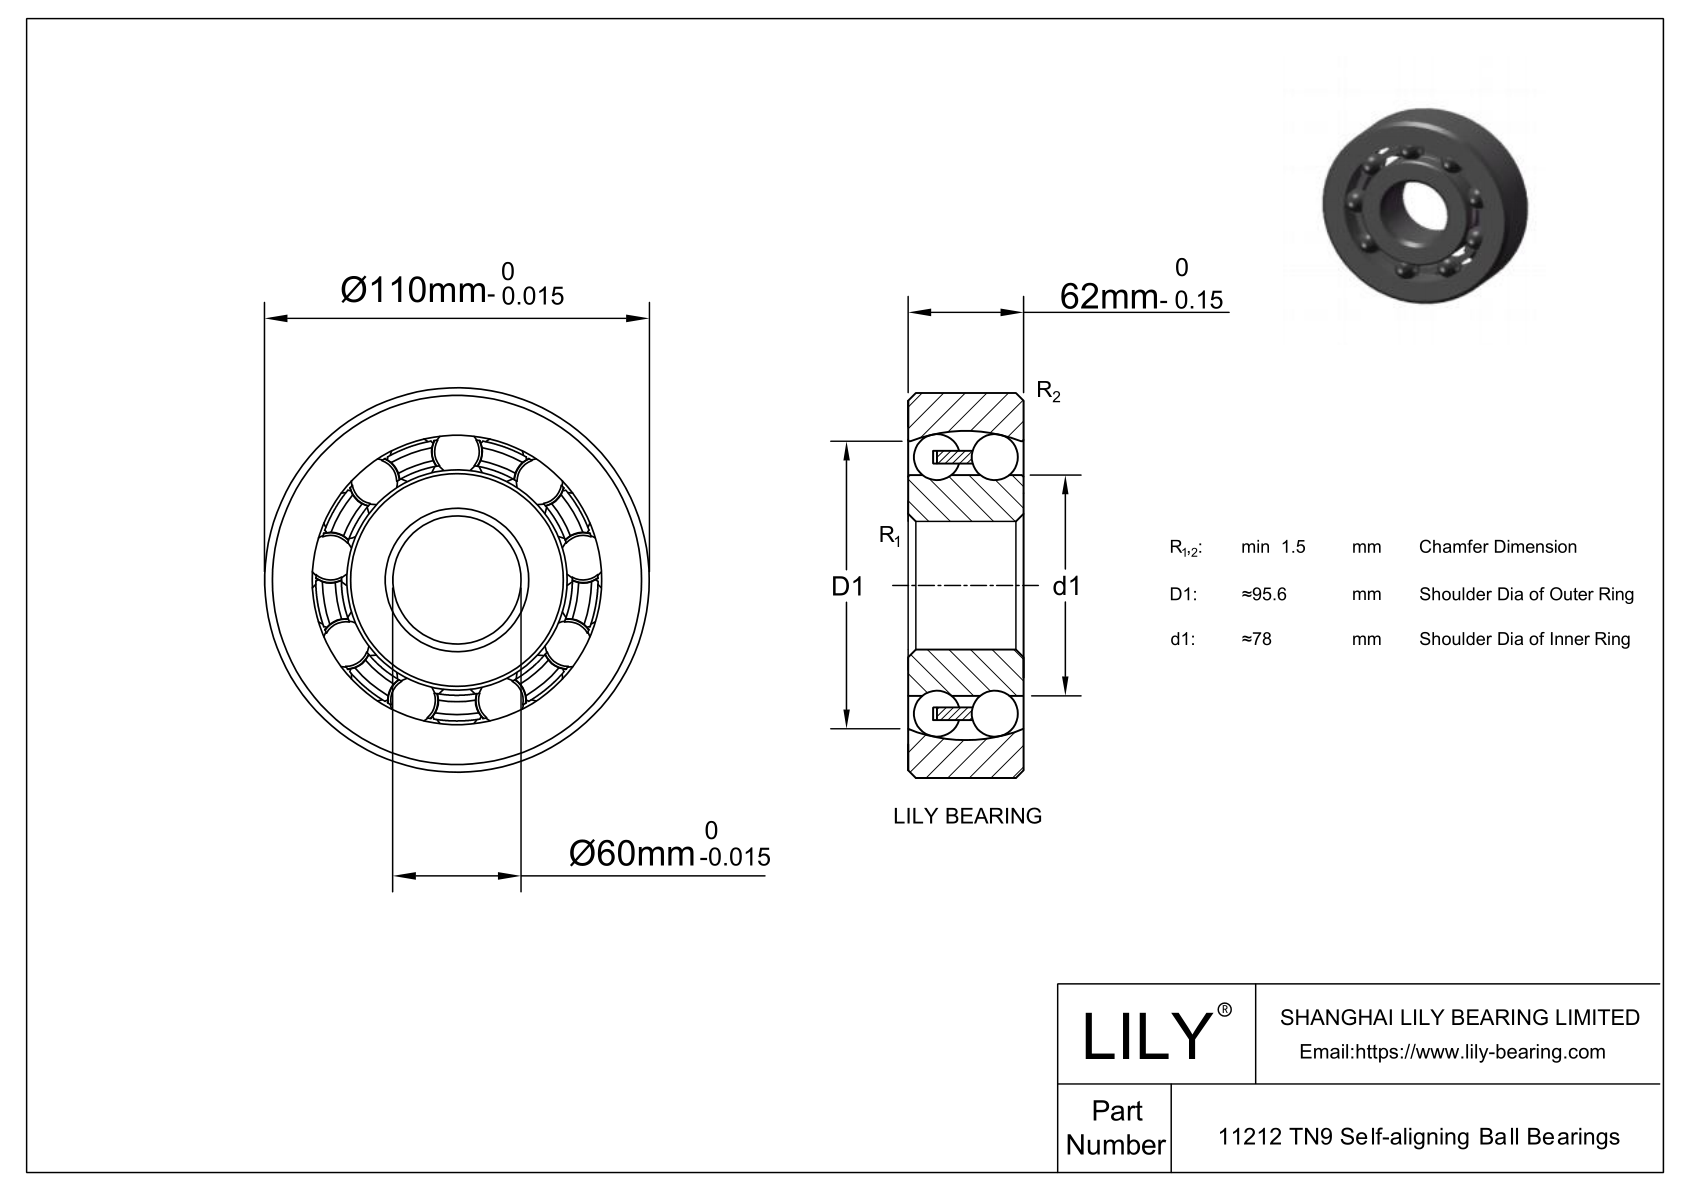 CE11212SI Silicon Nitride Self Aligning Ball Bearings cad drawing